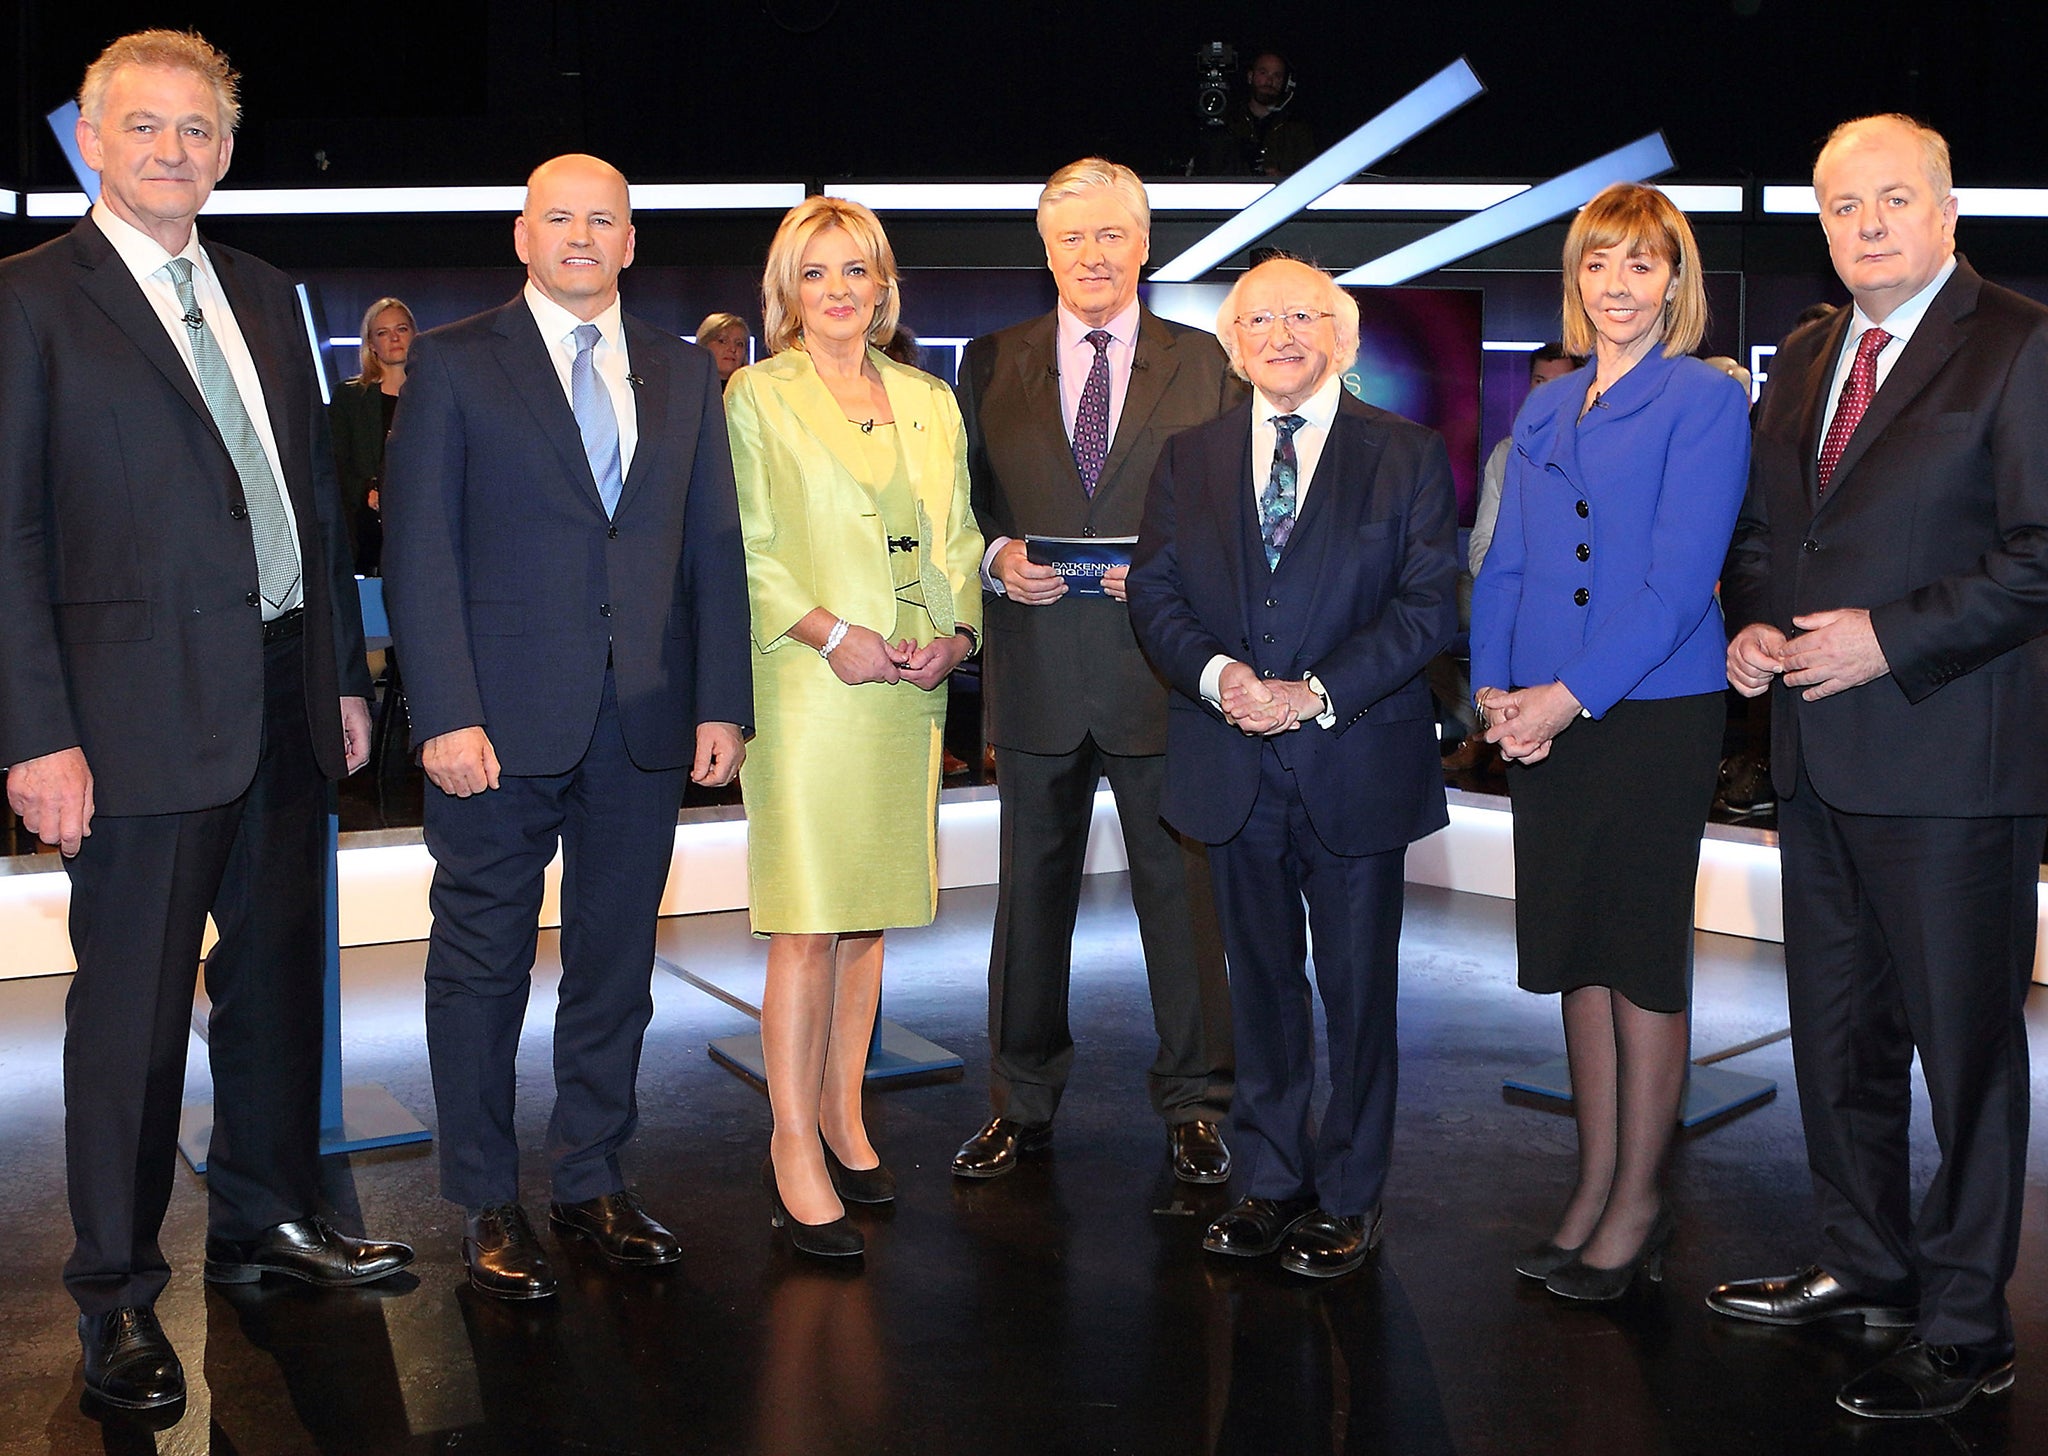 Irish presidential candidates (L to R) Peter Casey, Sean Gallagher, Liadh Ni Riada, Michael D Higgins, Joan Freeman and Gavin Duffy are pictured with Pat Kenny ahead of the final RTE debate